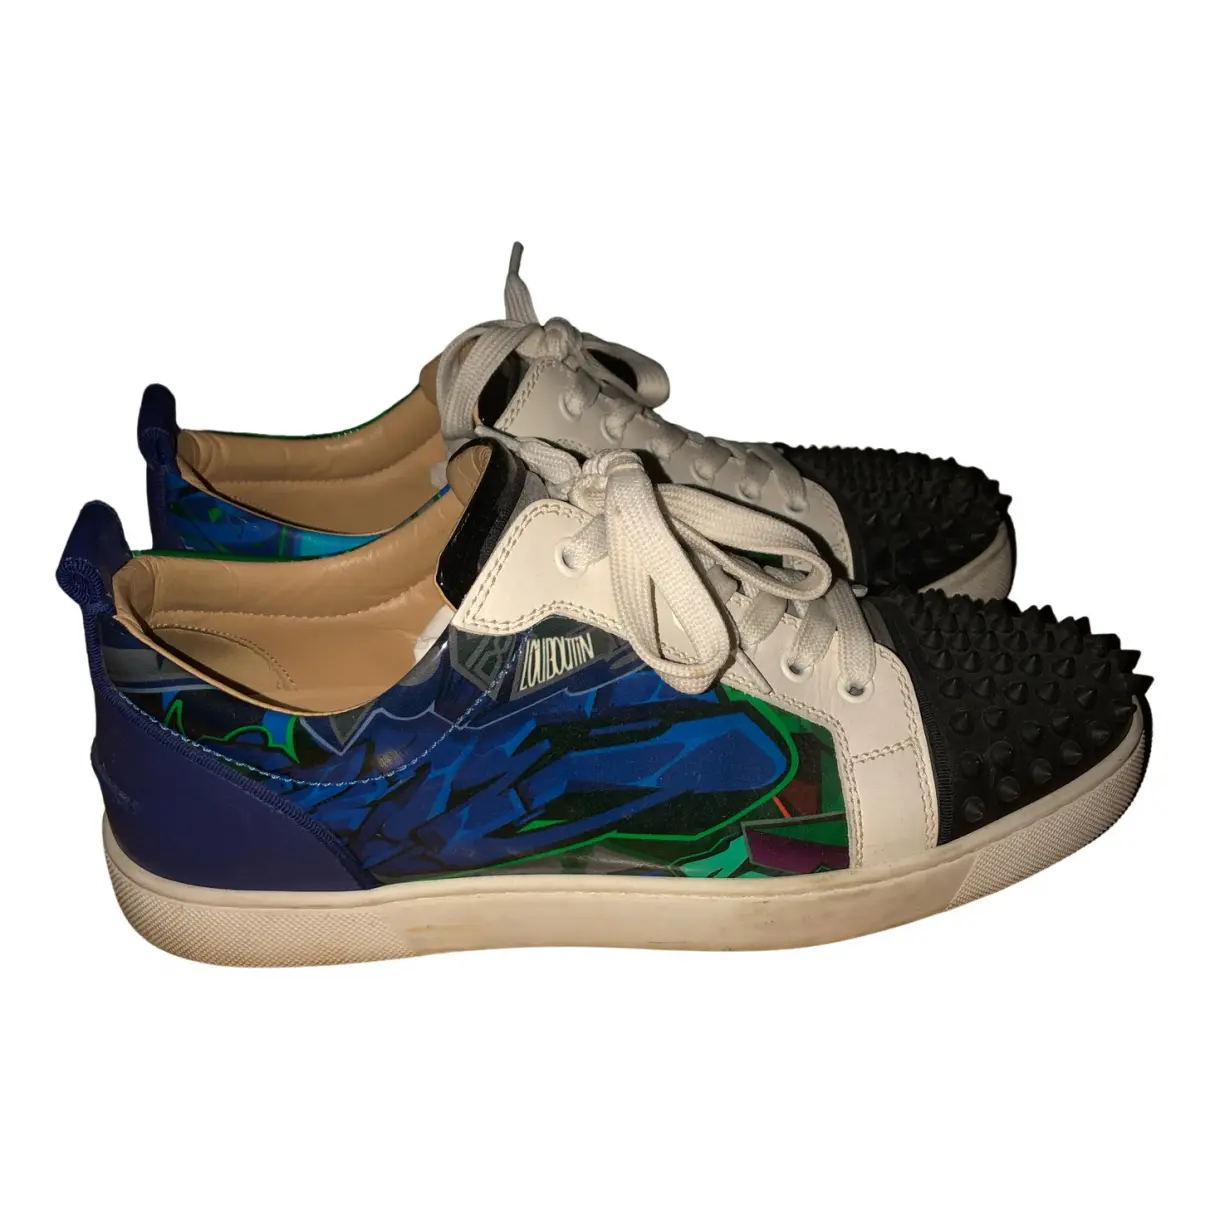 Louis junior spike patent leather low trainers Christian Louboutin